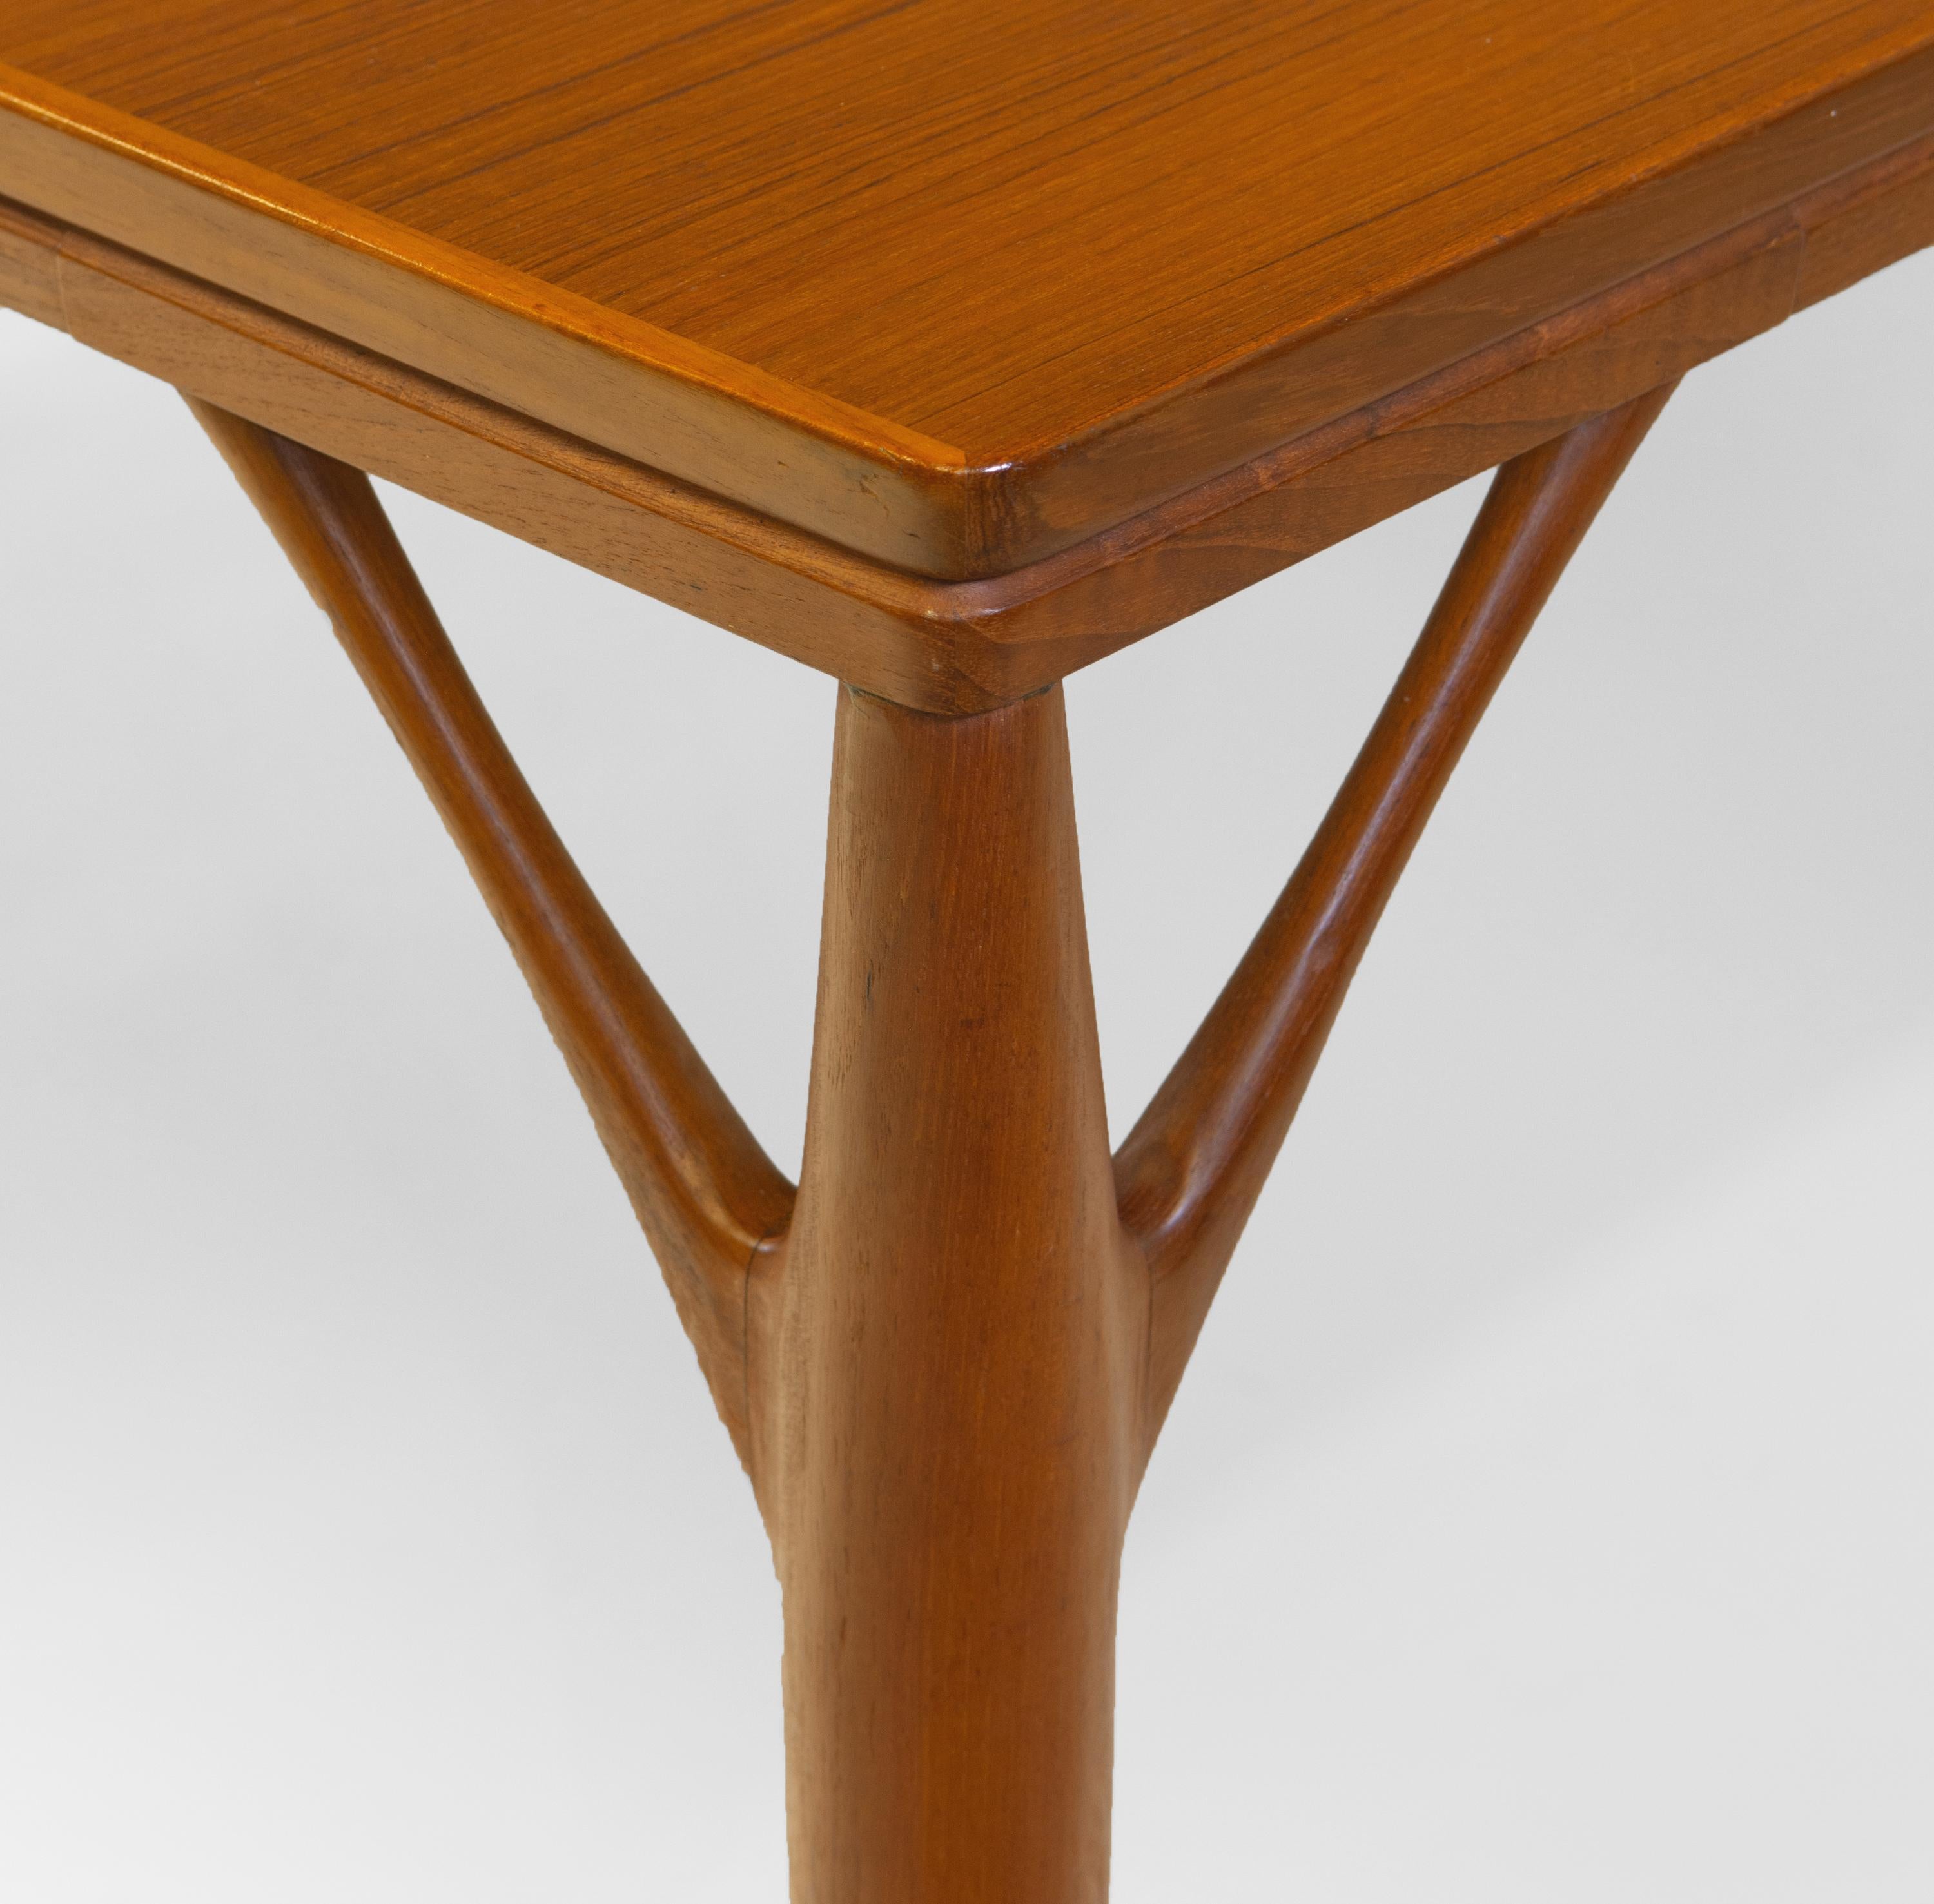 Hand-Carved Danish Teak ‘Tree Leg’ Mid Century Extending Large Dining Table By H Sigh & Sons For Sale